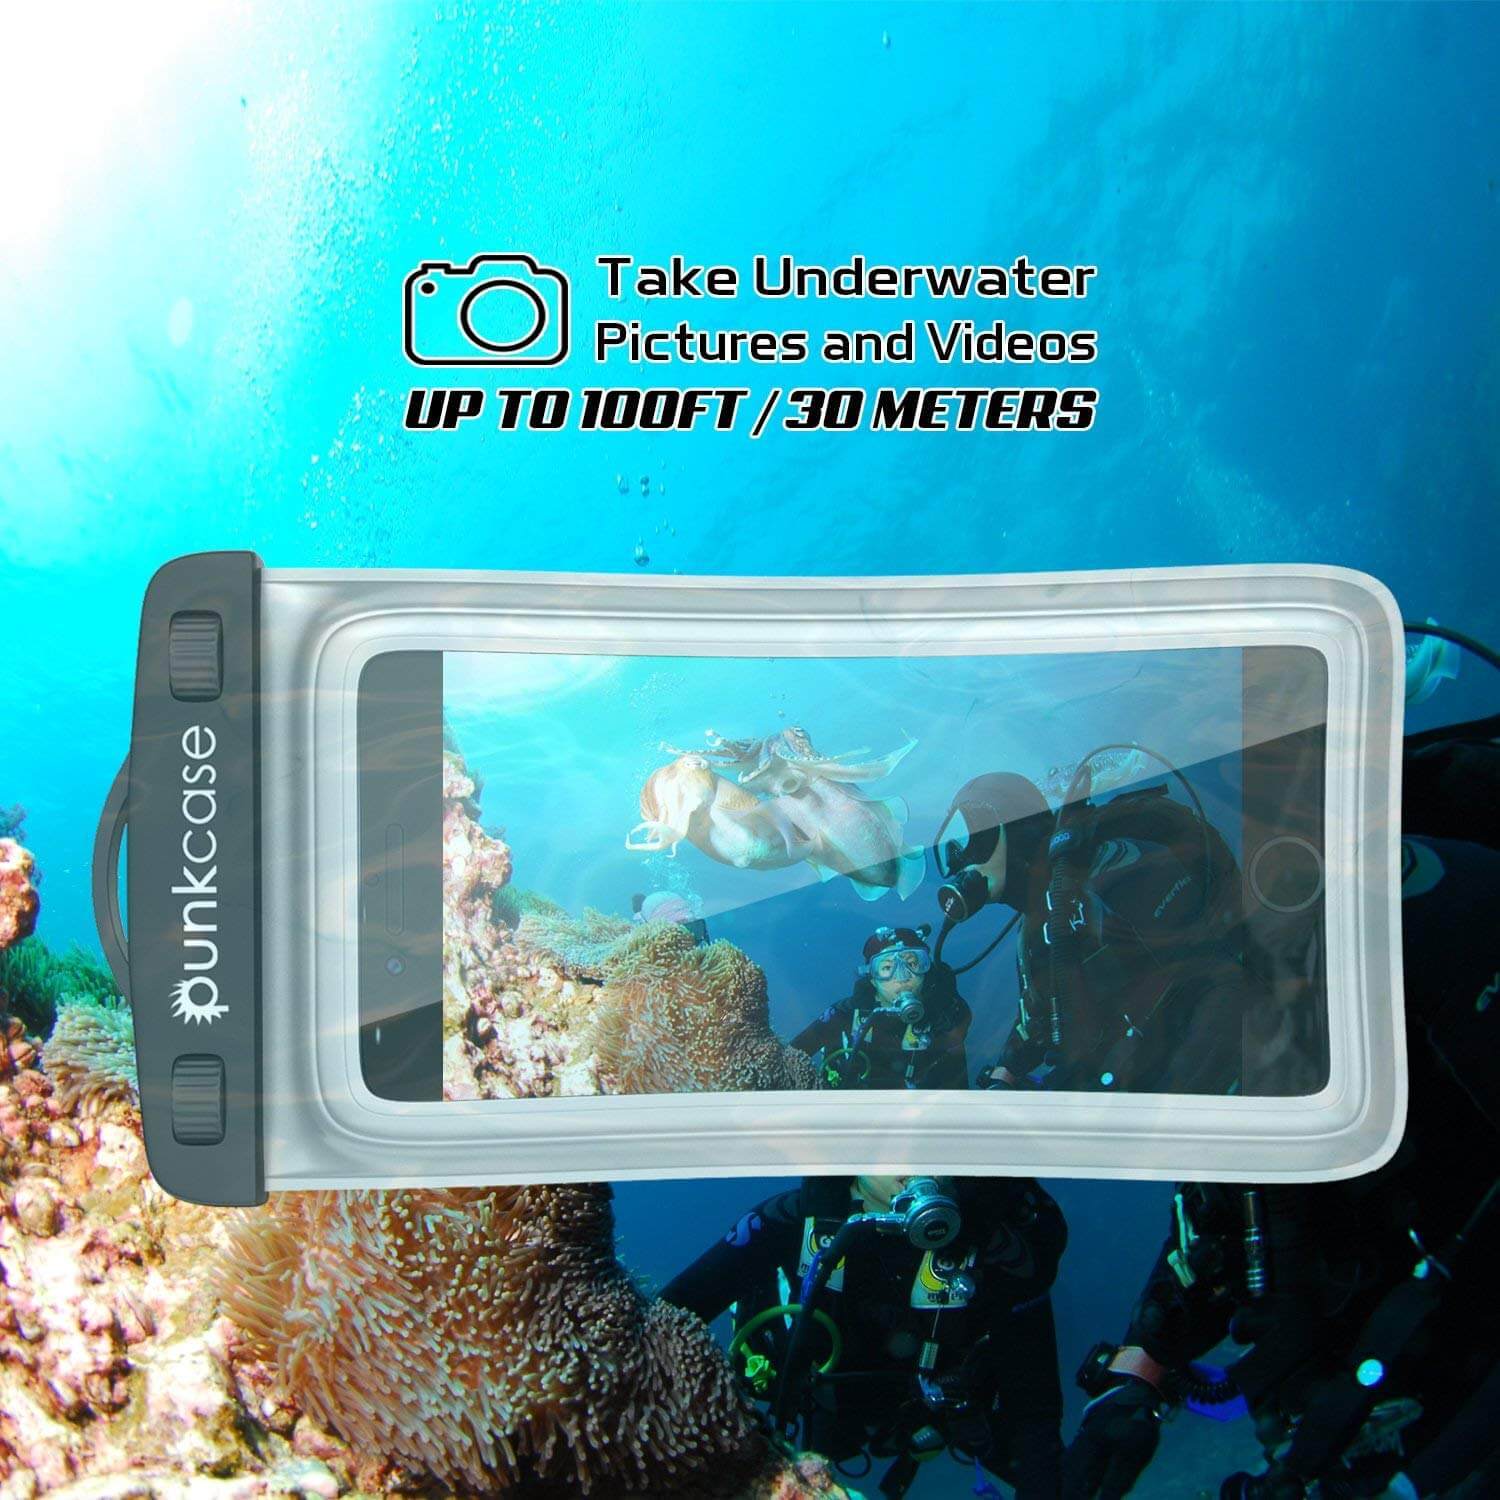 Waterproof Phone Pouch, PunkBag Universal Floating Dry Case Bag for most Cell Phones [Clear] - PunkCase NZ